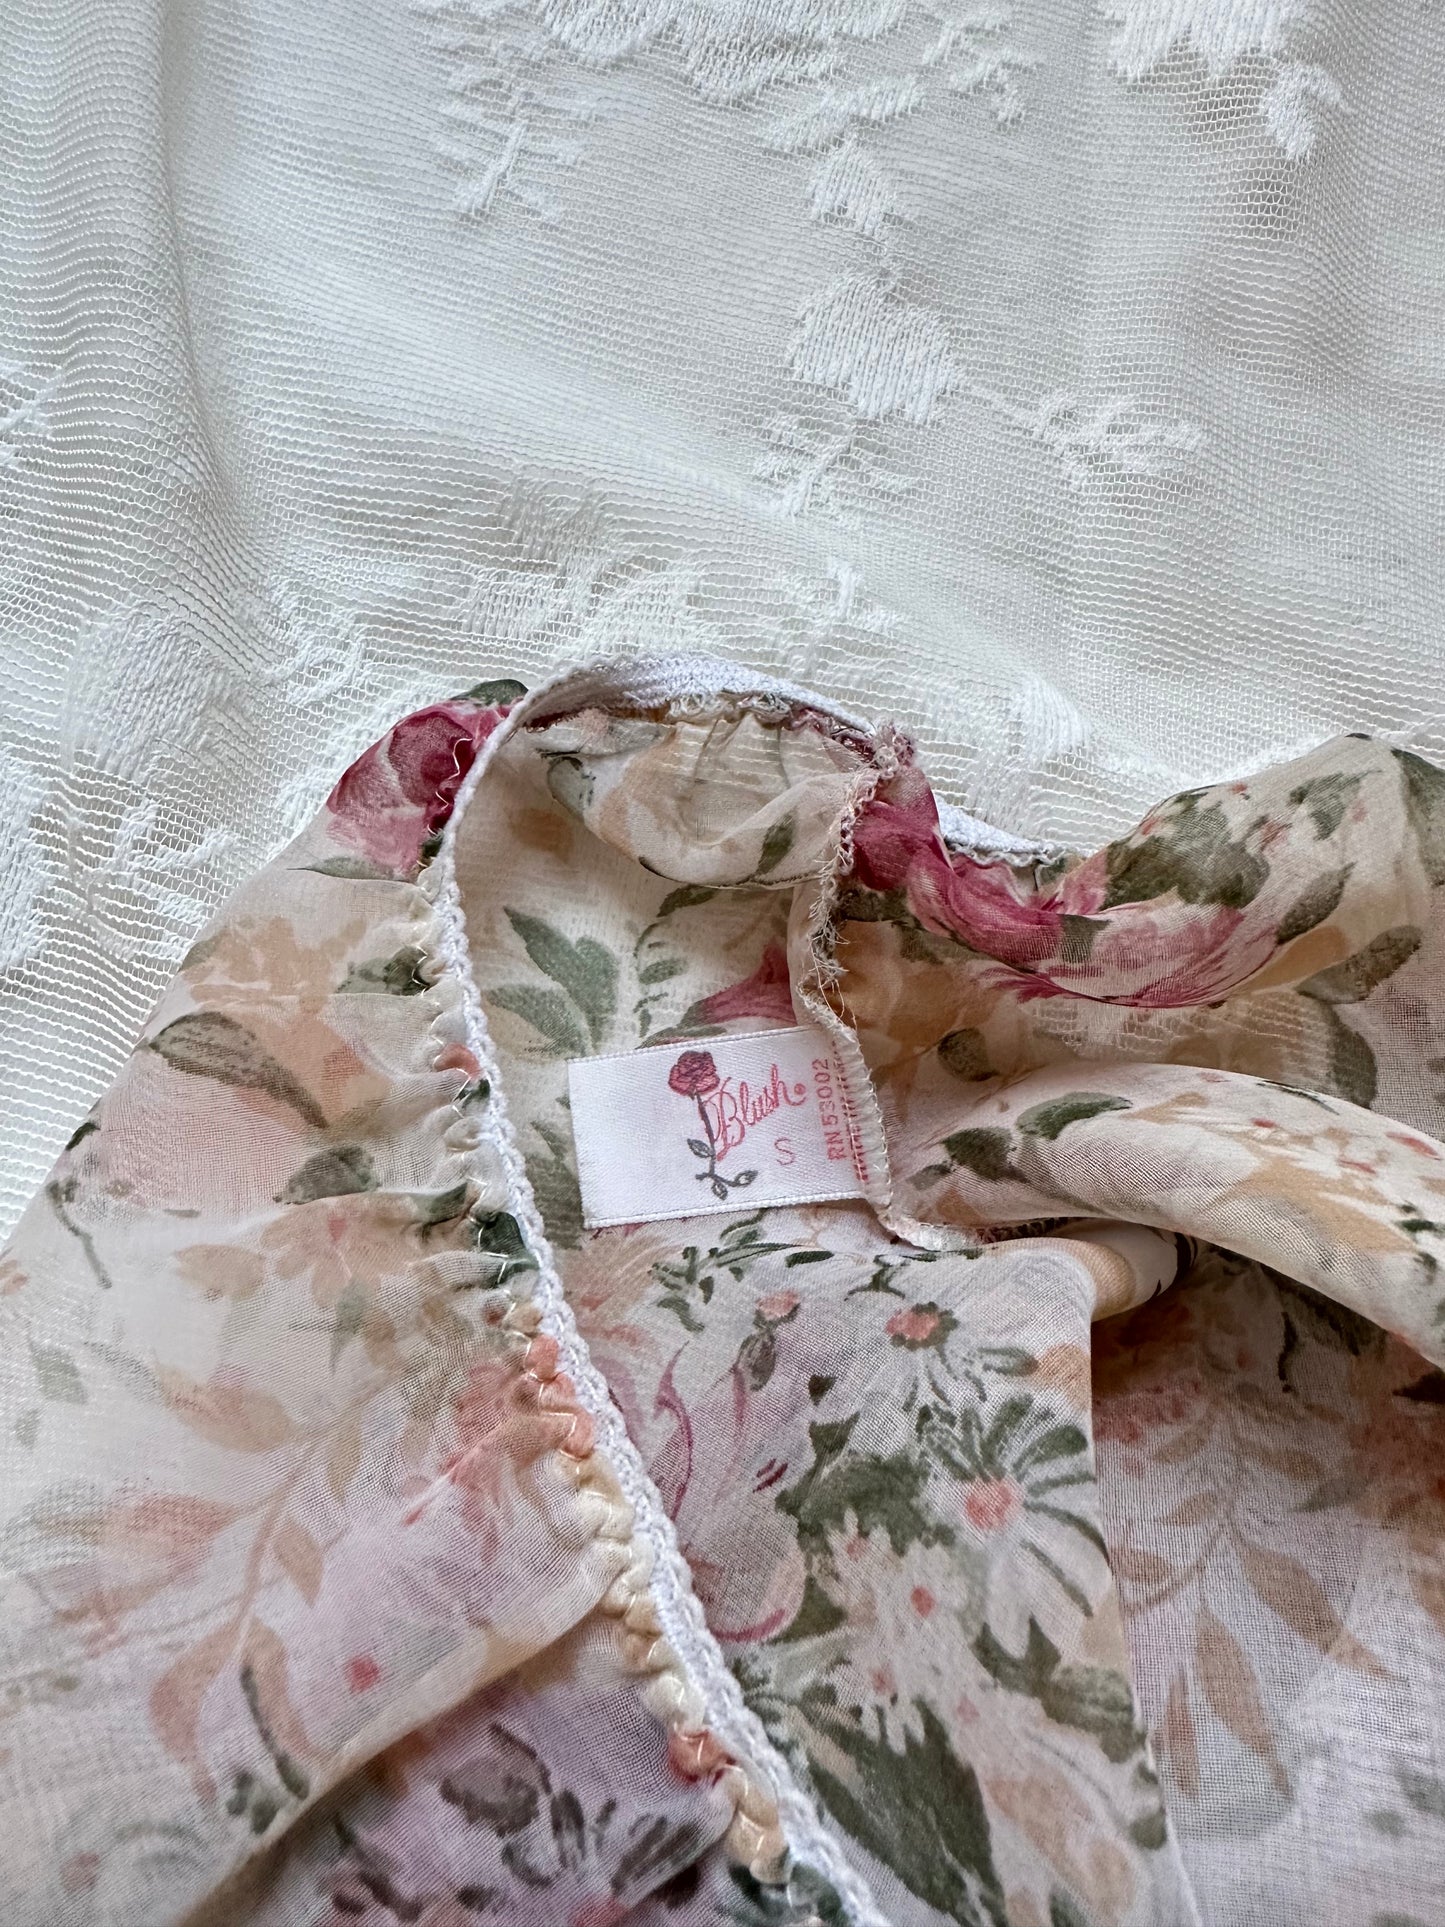 Dreamy Sheer Vintage Floral Dress featuring Rose Garden Prints with Soft Lace Skirt